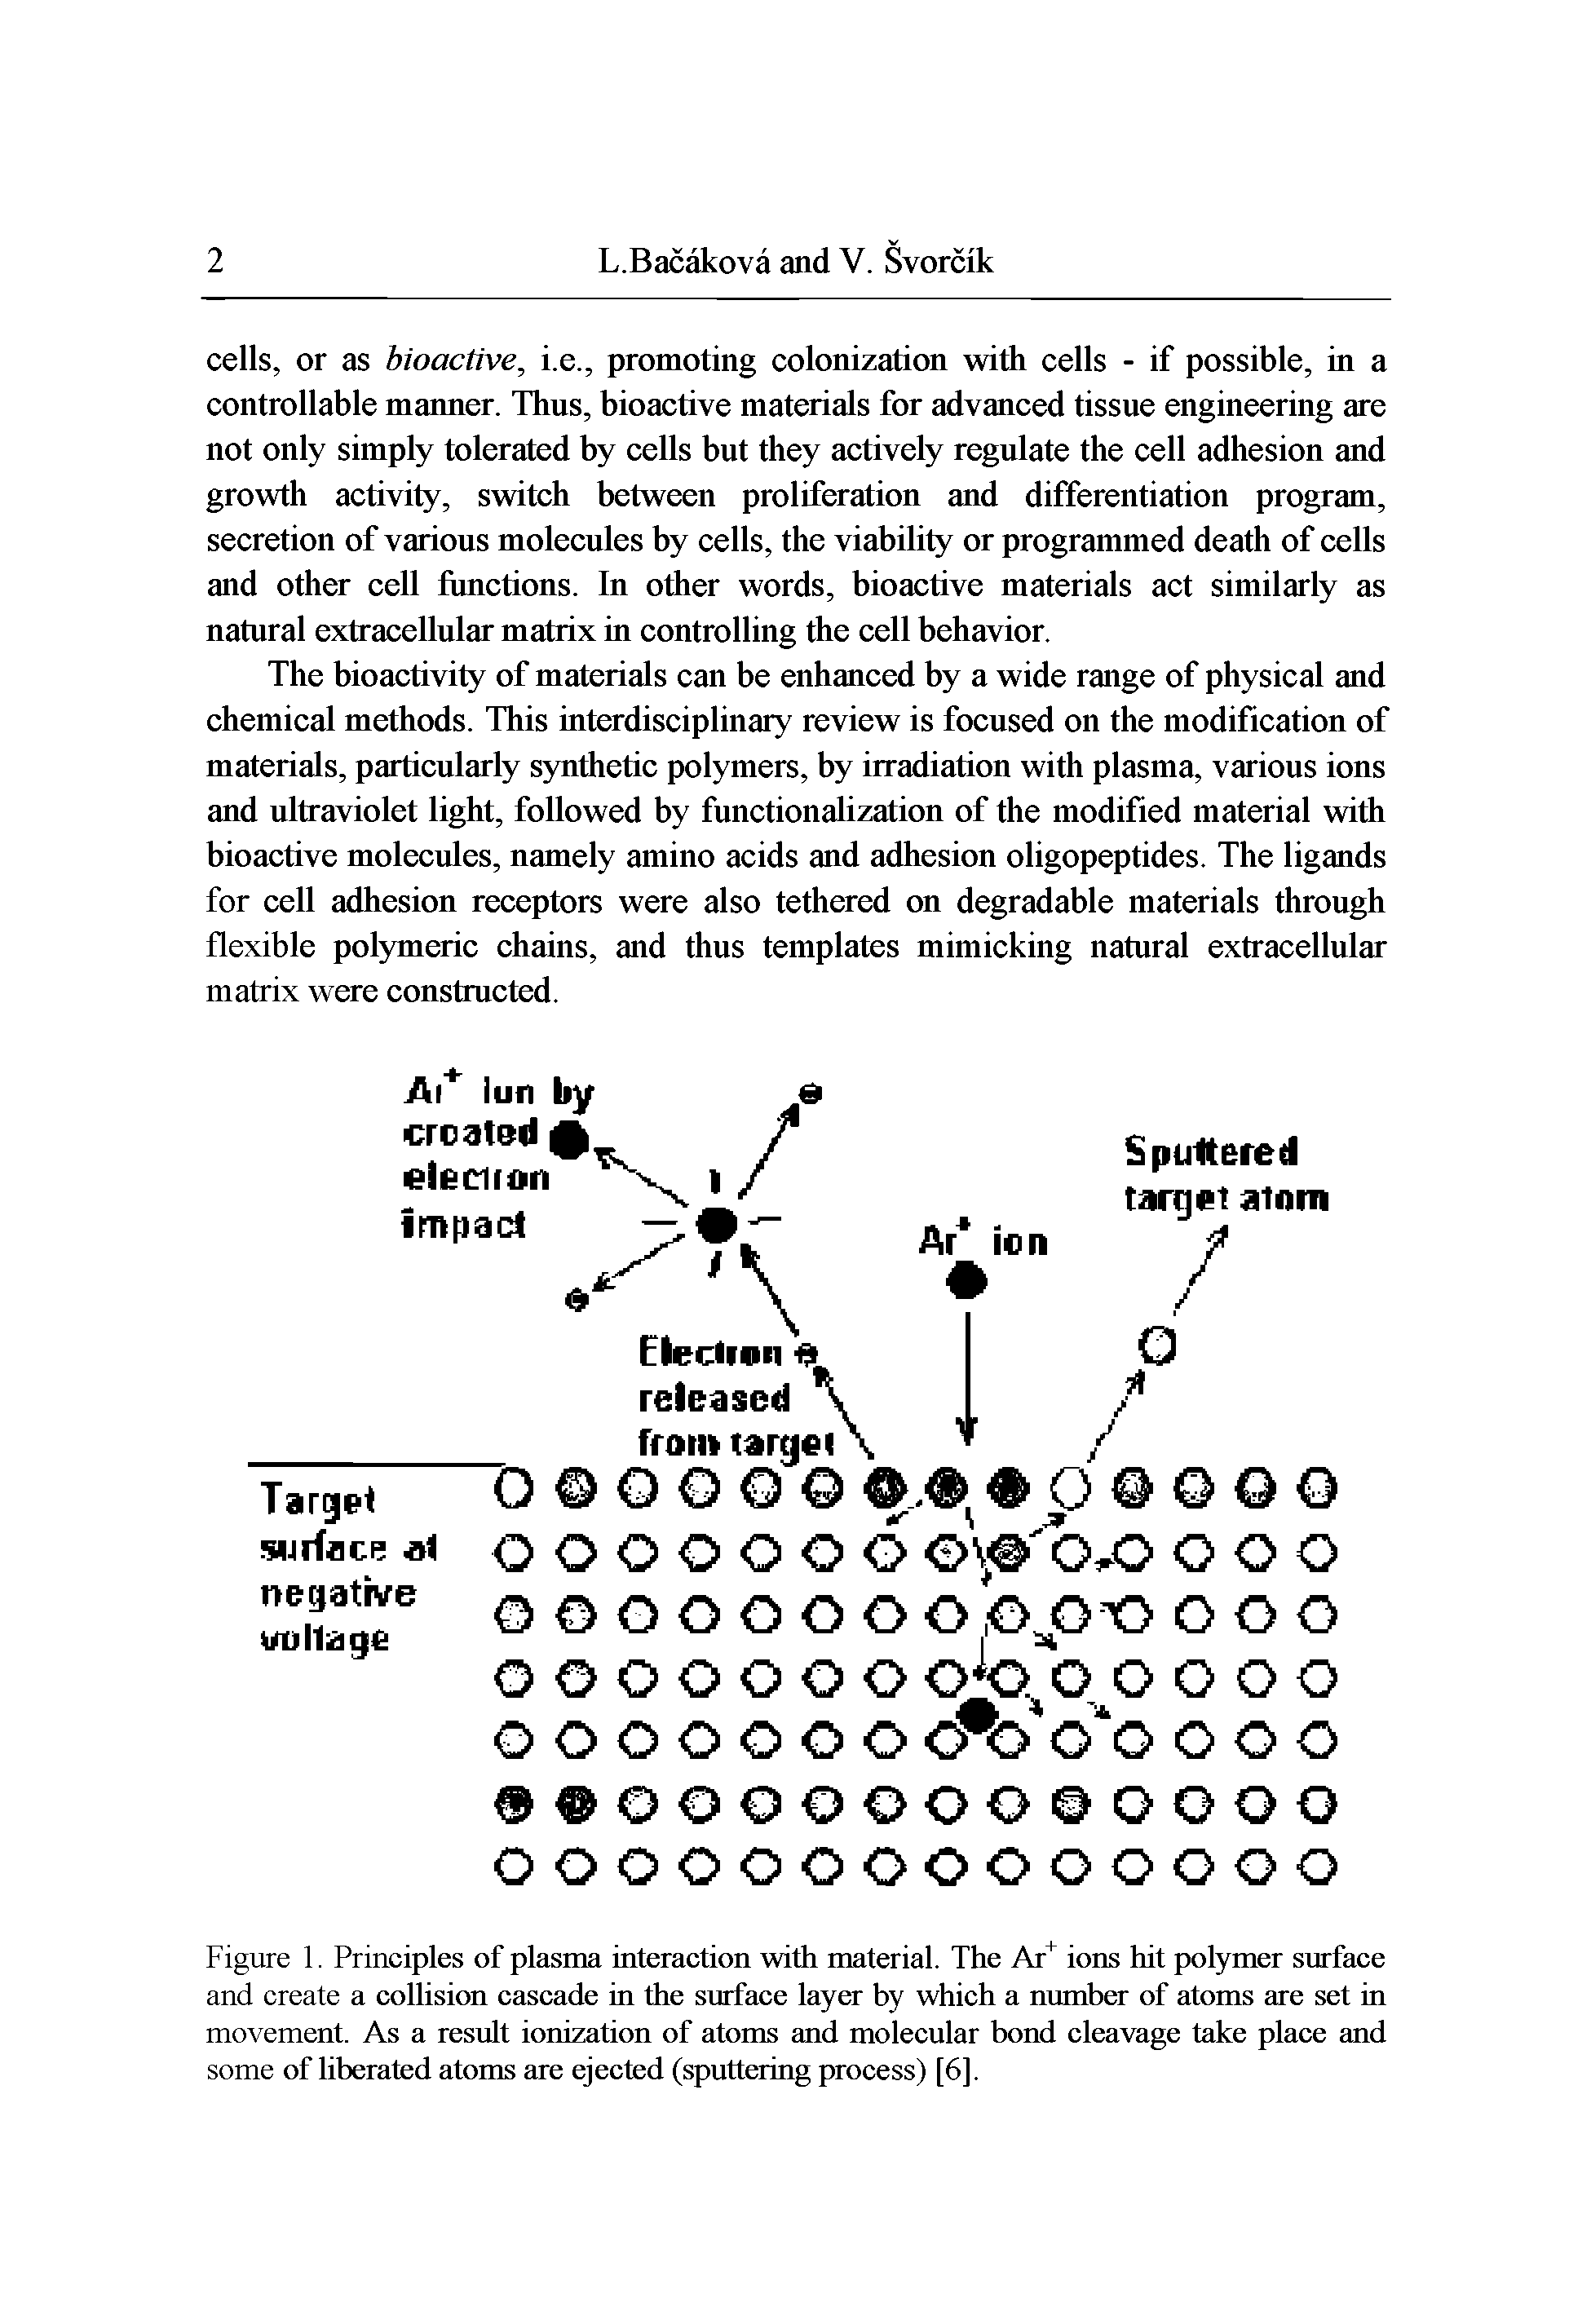 Figure 1. Principles of plasma interaction with material. The Ar ions hit polymer surface and create a collision cascade in the surface layer by which a number of atoms are set in movement. As a result ionization of atoms and molecular bond cleavage take place and some of liberated atoms are ejected (sputtering process) [6].